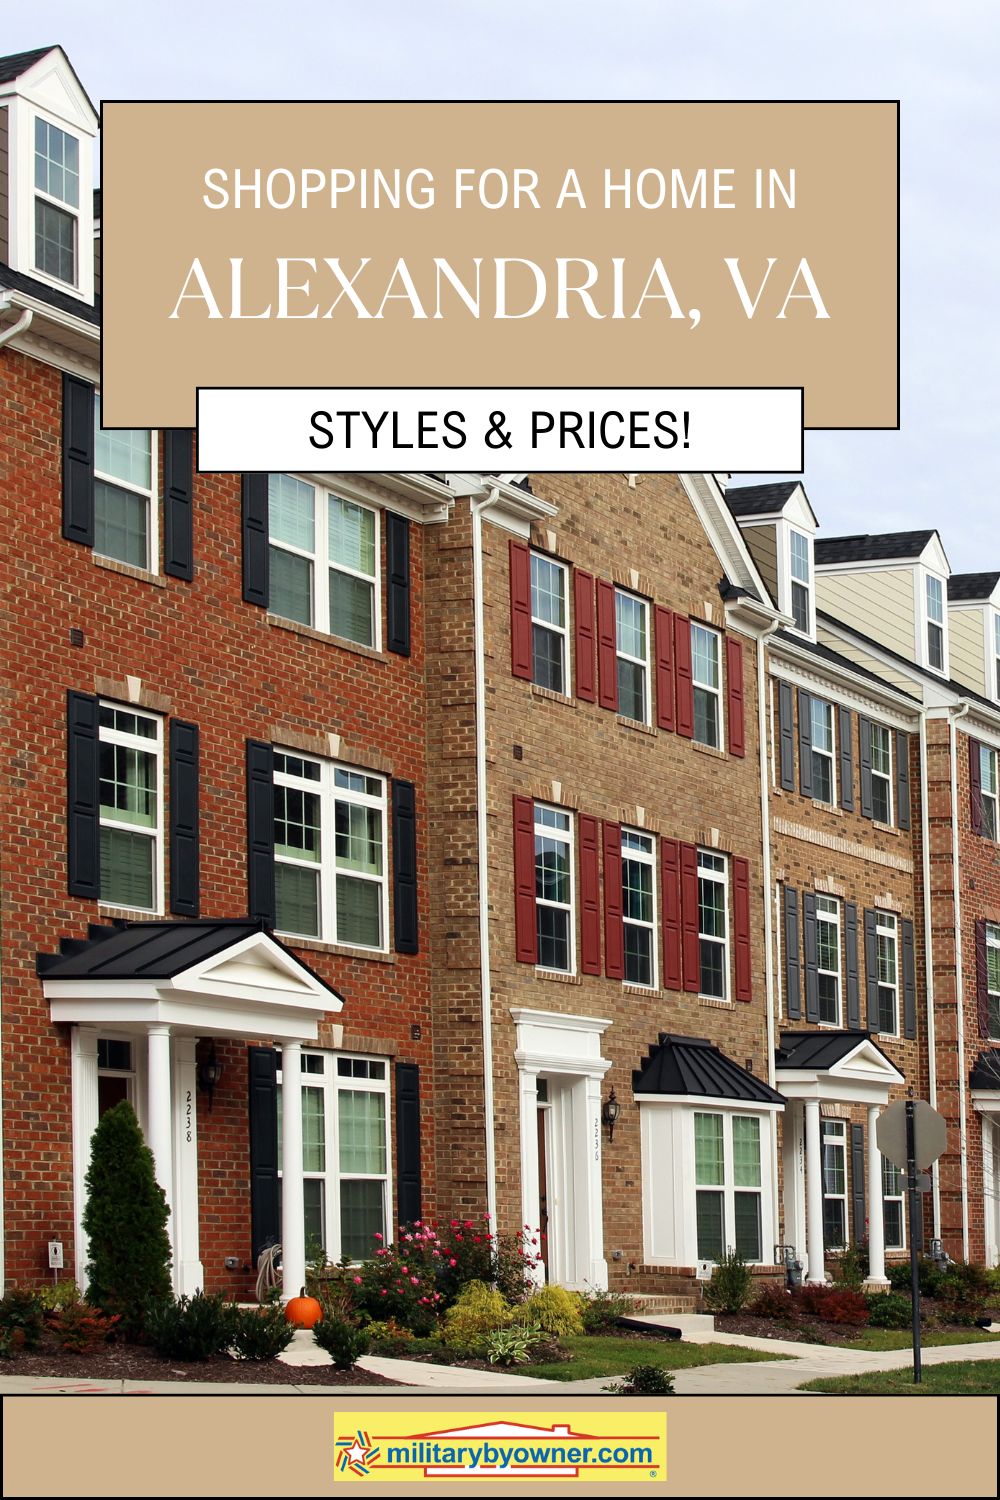 Article_Home_Shopping_in_Alexandria_VA_Styles_and_Prices